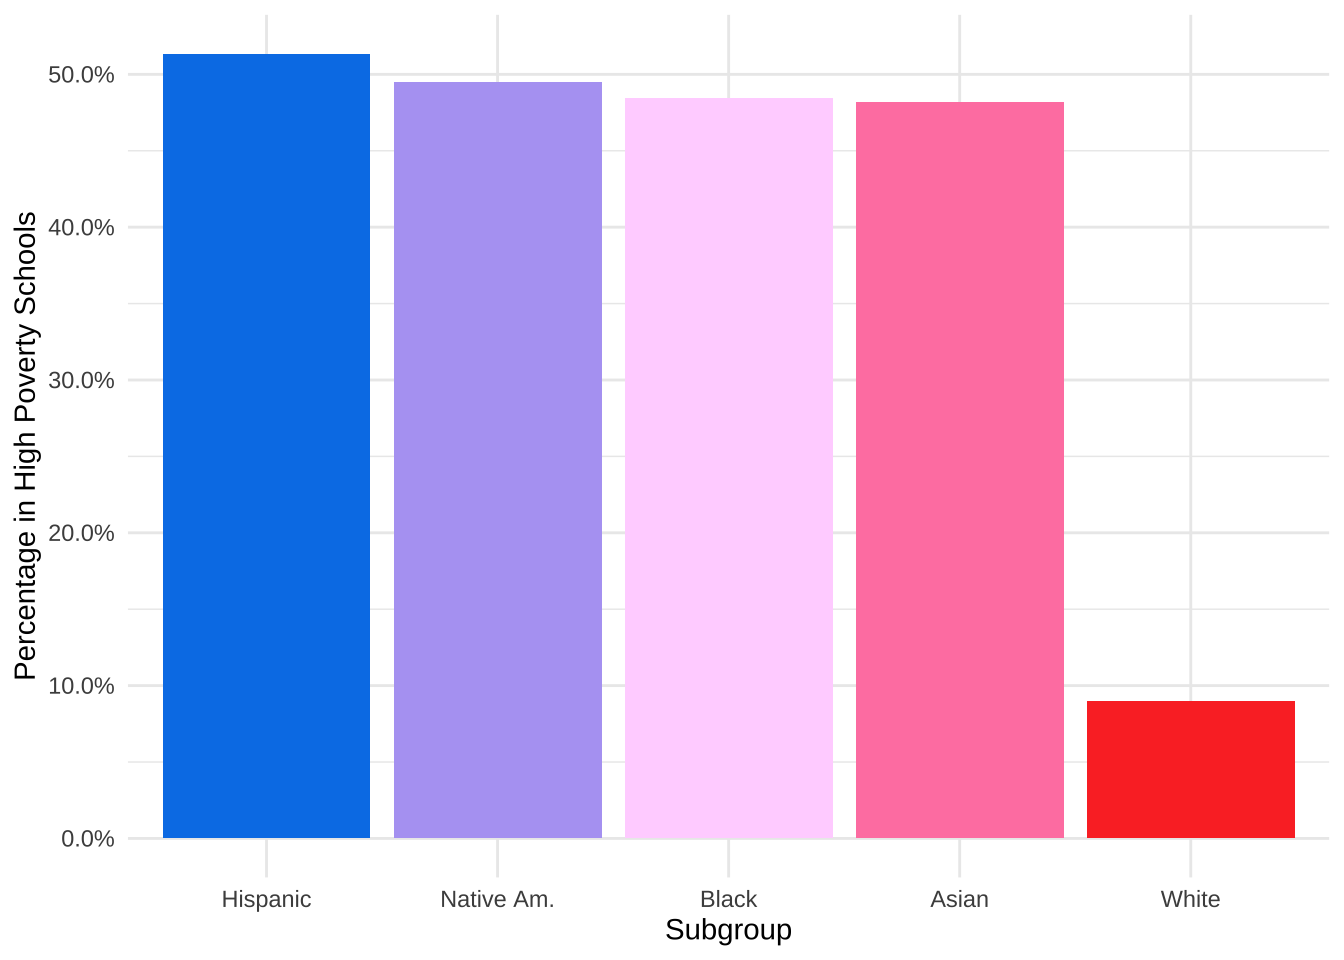 Barplot showing demographic breakdown of students attending schools which high percentage of poverty. About 50% of Black, Hispanic, Native American, and Asian student attend high-poverty schools compared to 9% of White students.